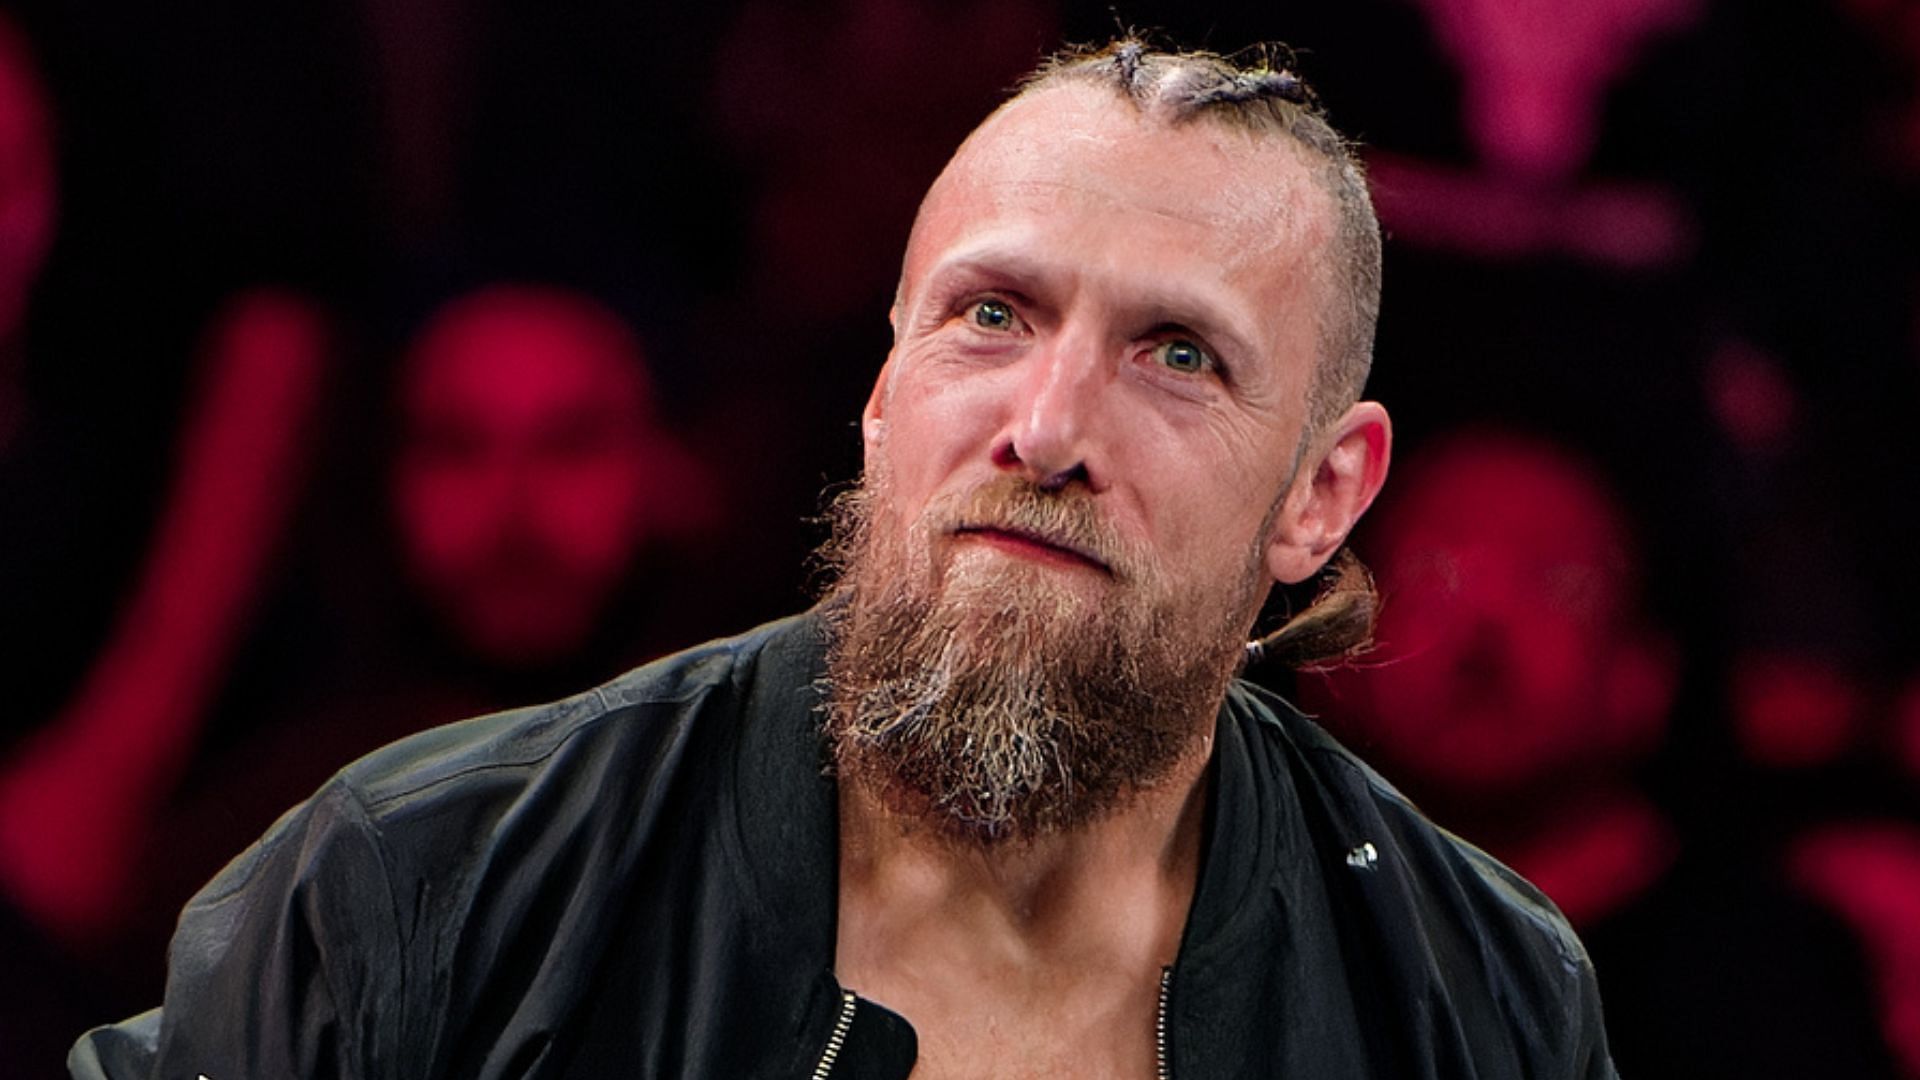 Bryan Danielson has had to cancel an upcoming appearance